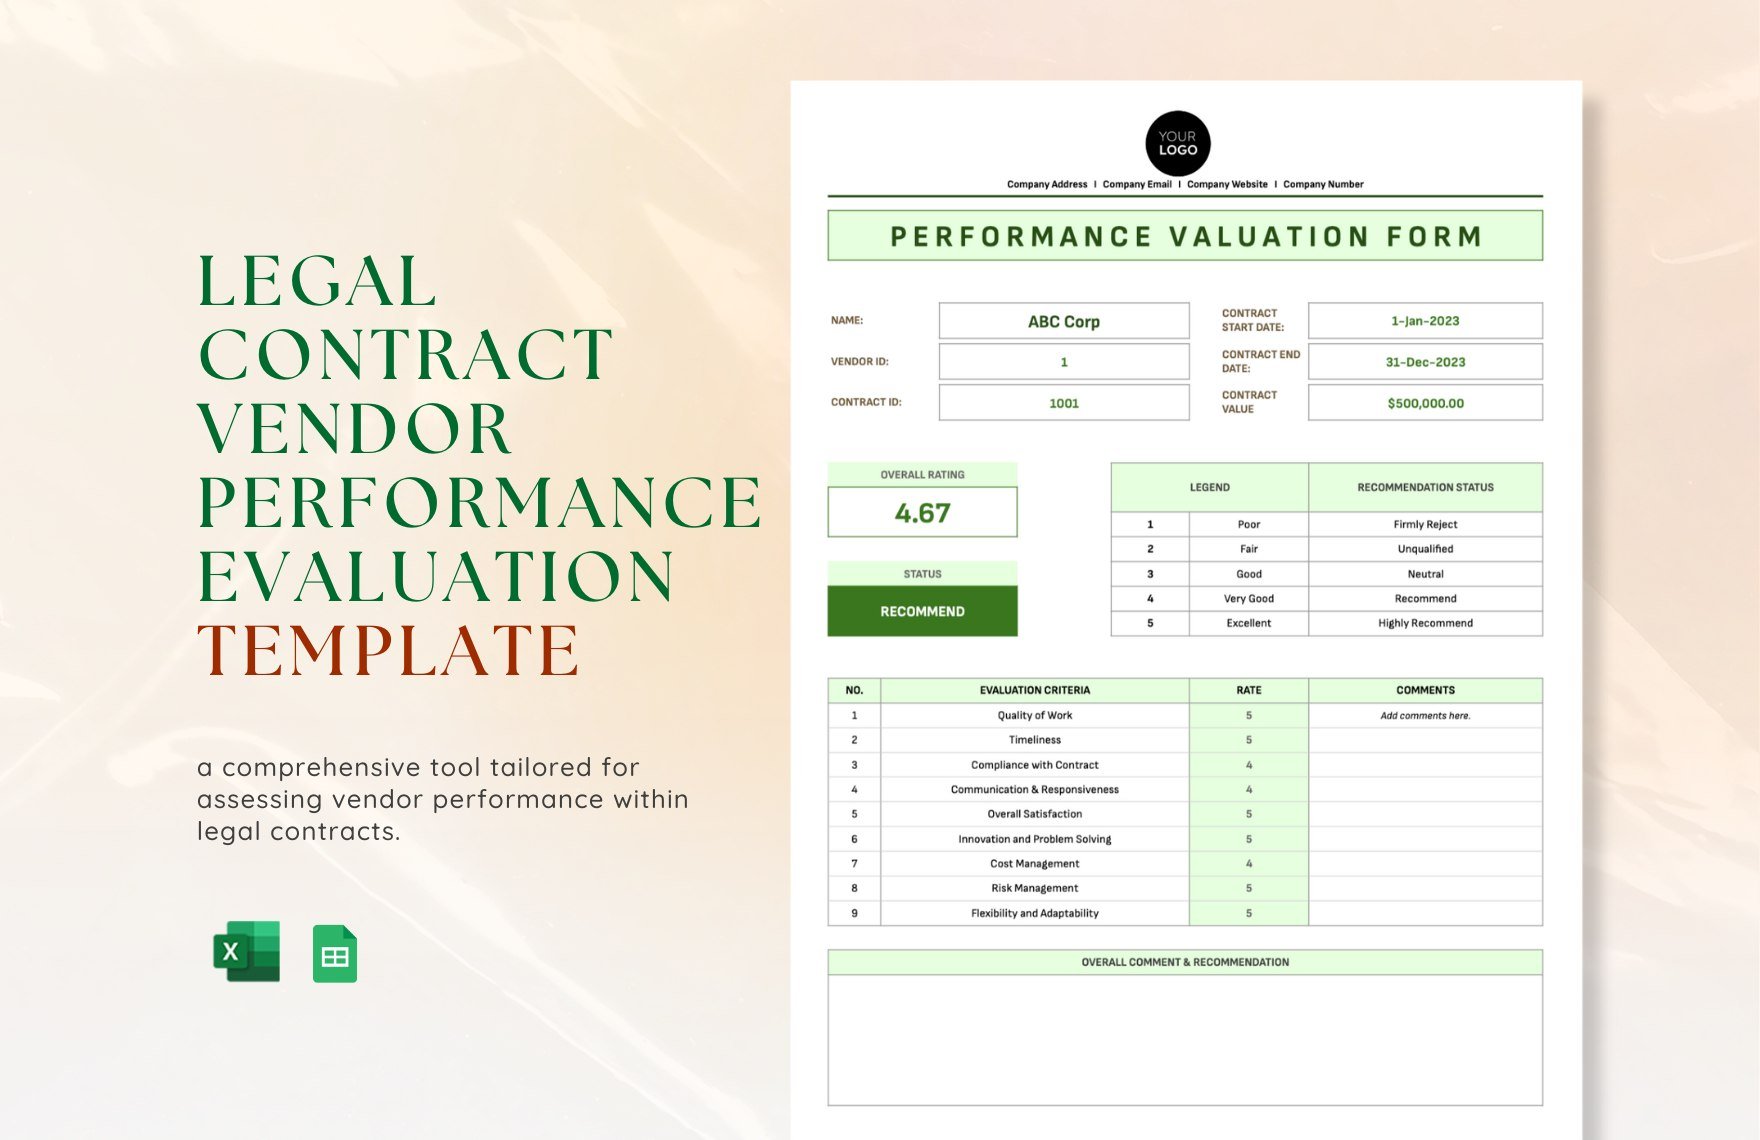 Legal Contract Vendor Performance Evaluation Template in Excel, Google Sheets